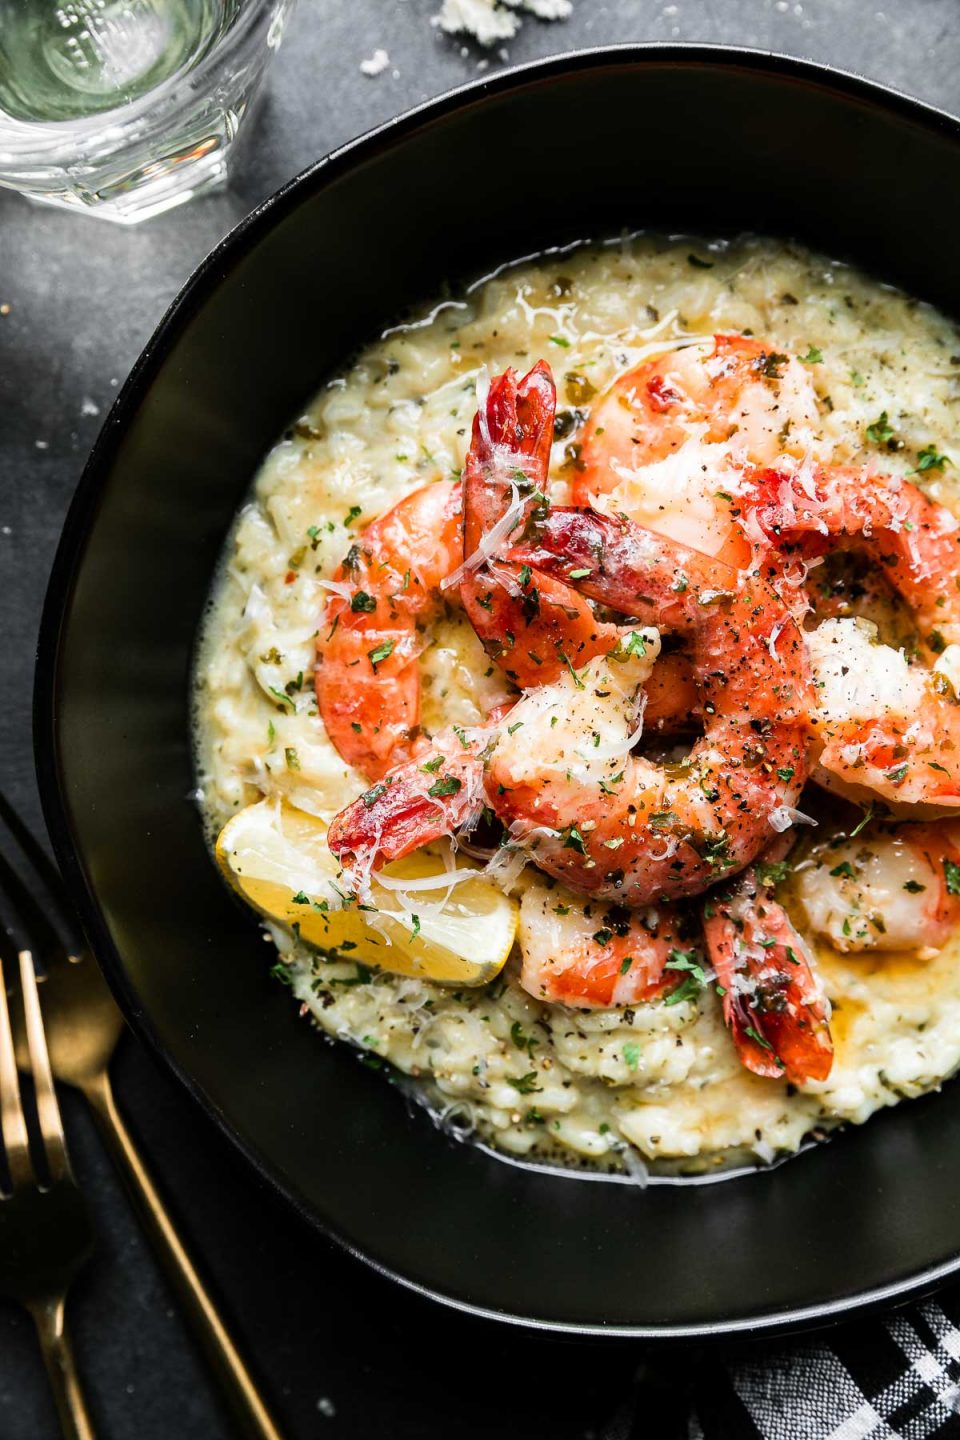 An overhead shot of Prosecco Butter Poached Shrimp served atop a bed of risotto in a black bowl rests atop a black textured surface. A few spoonfuls of poaching liquid have been poured over the shrimp & the dish has been garnished with freshly grated parmesan cheese and a lemon wedge tucked alongside the shrimp. Gold silverware, a glass filled with Prosecco, and a black and white plaid linen napkin surround the bowl of shrimp.